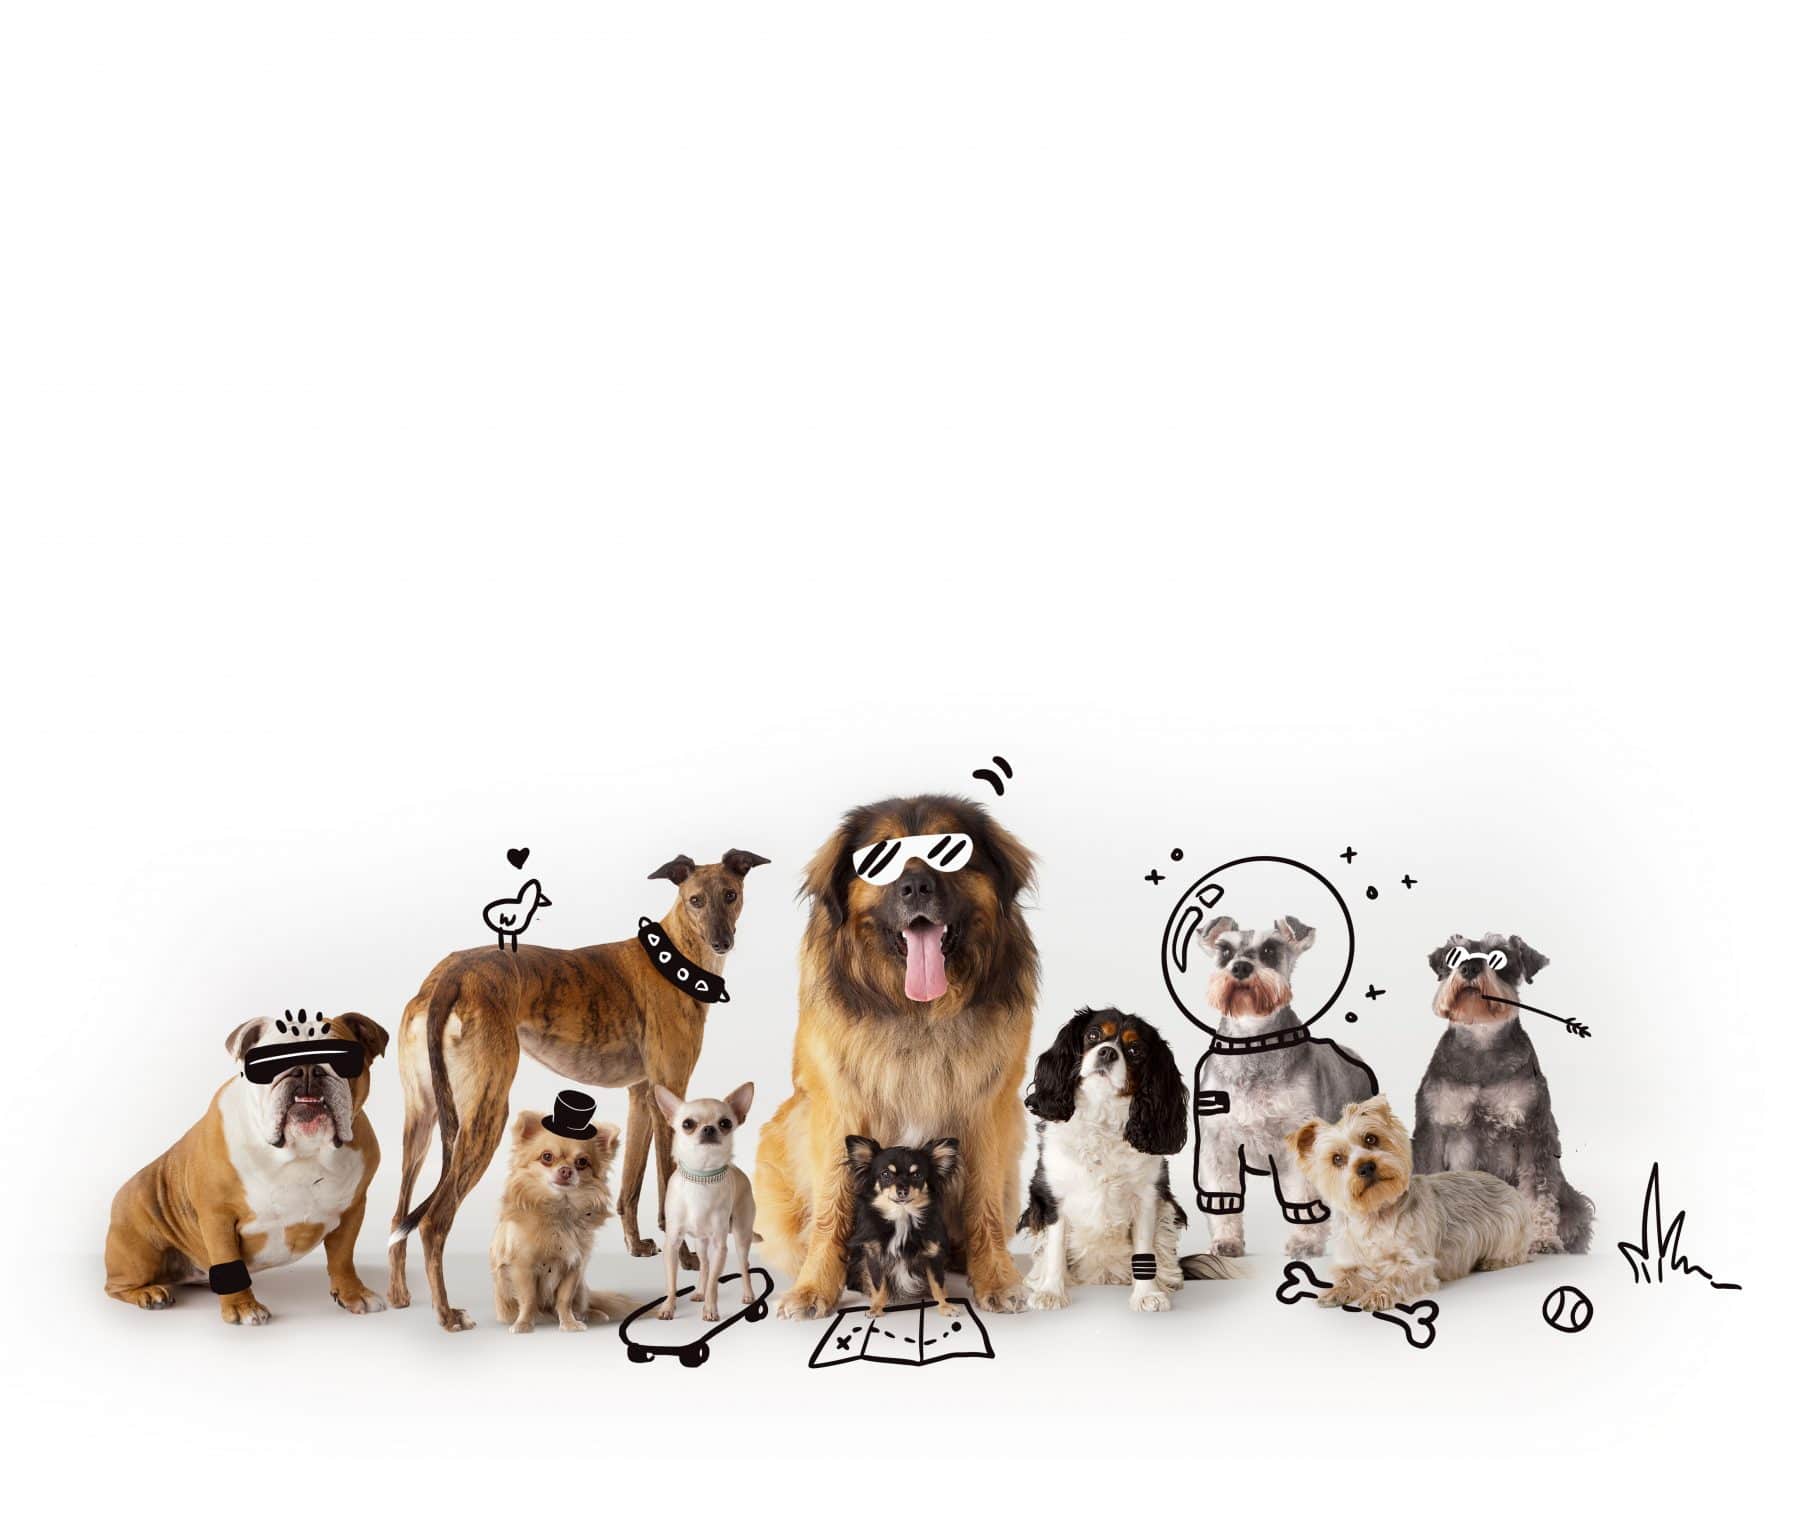 Dog Breed Selector | The Dog People by 